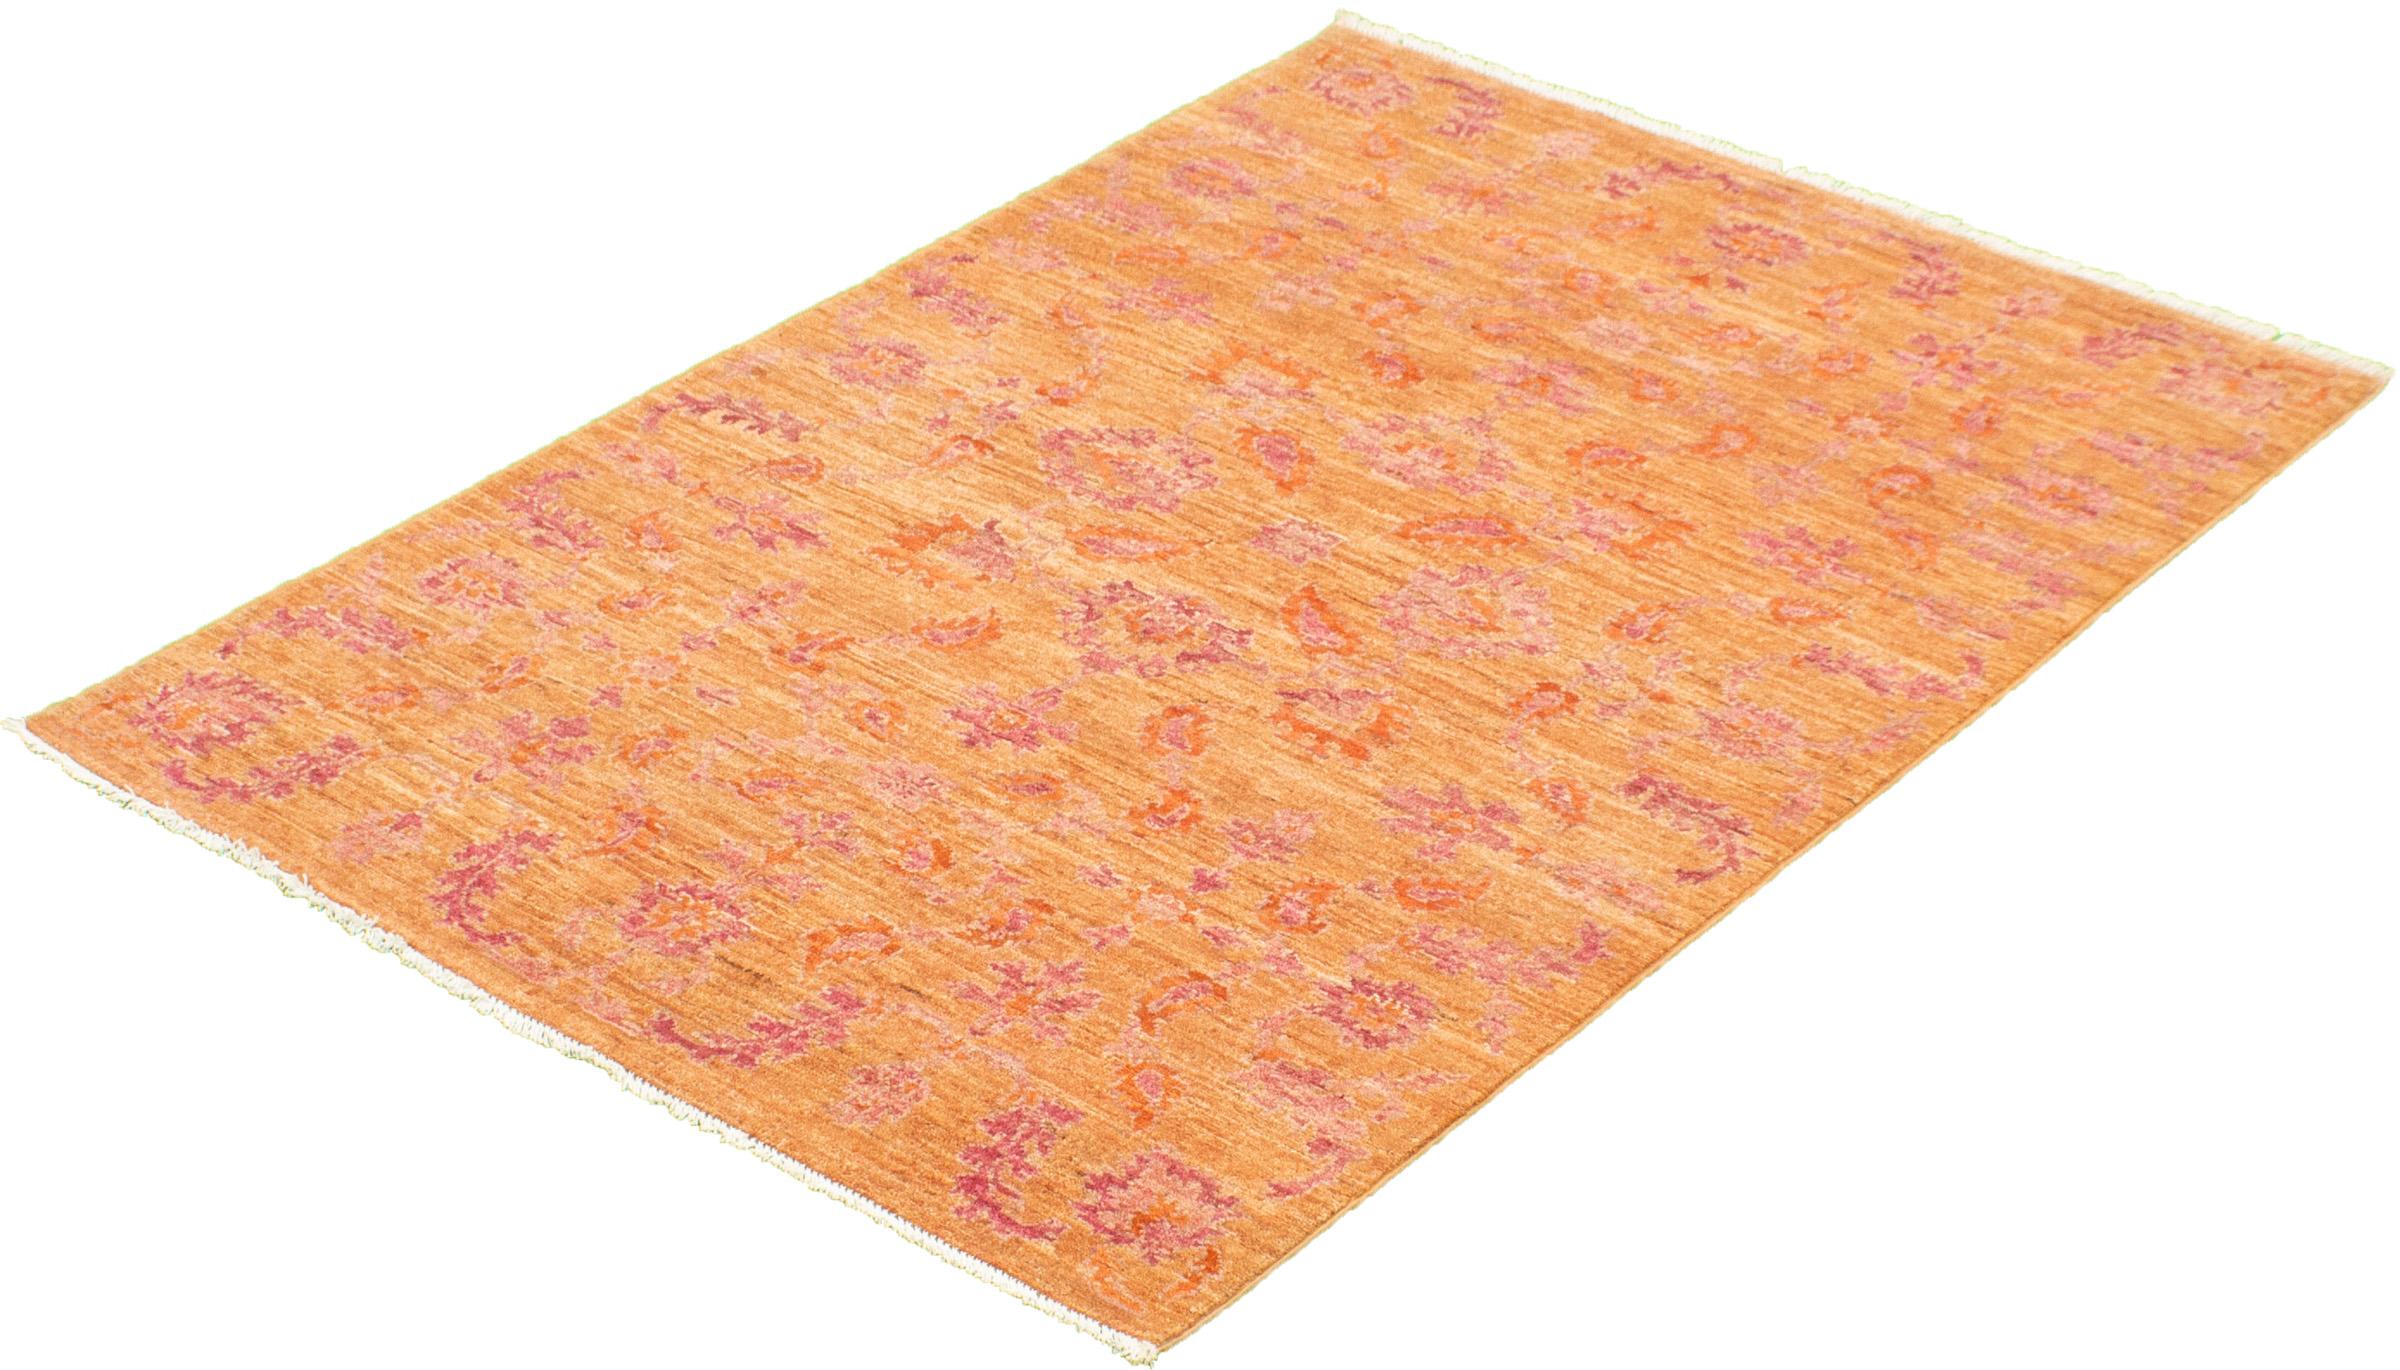 Pink and Orange Wool Persian Oushak Rug, Hand-Knotted, 4’ x 6’ In New Condition For Sale In New York, NY